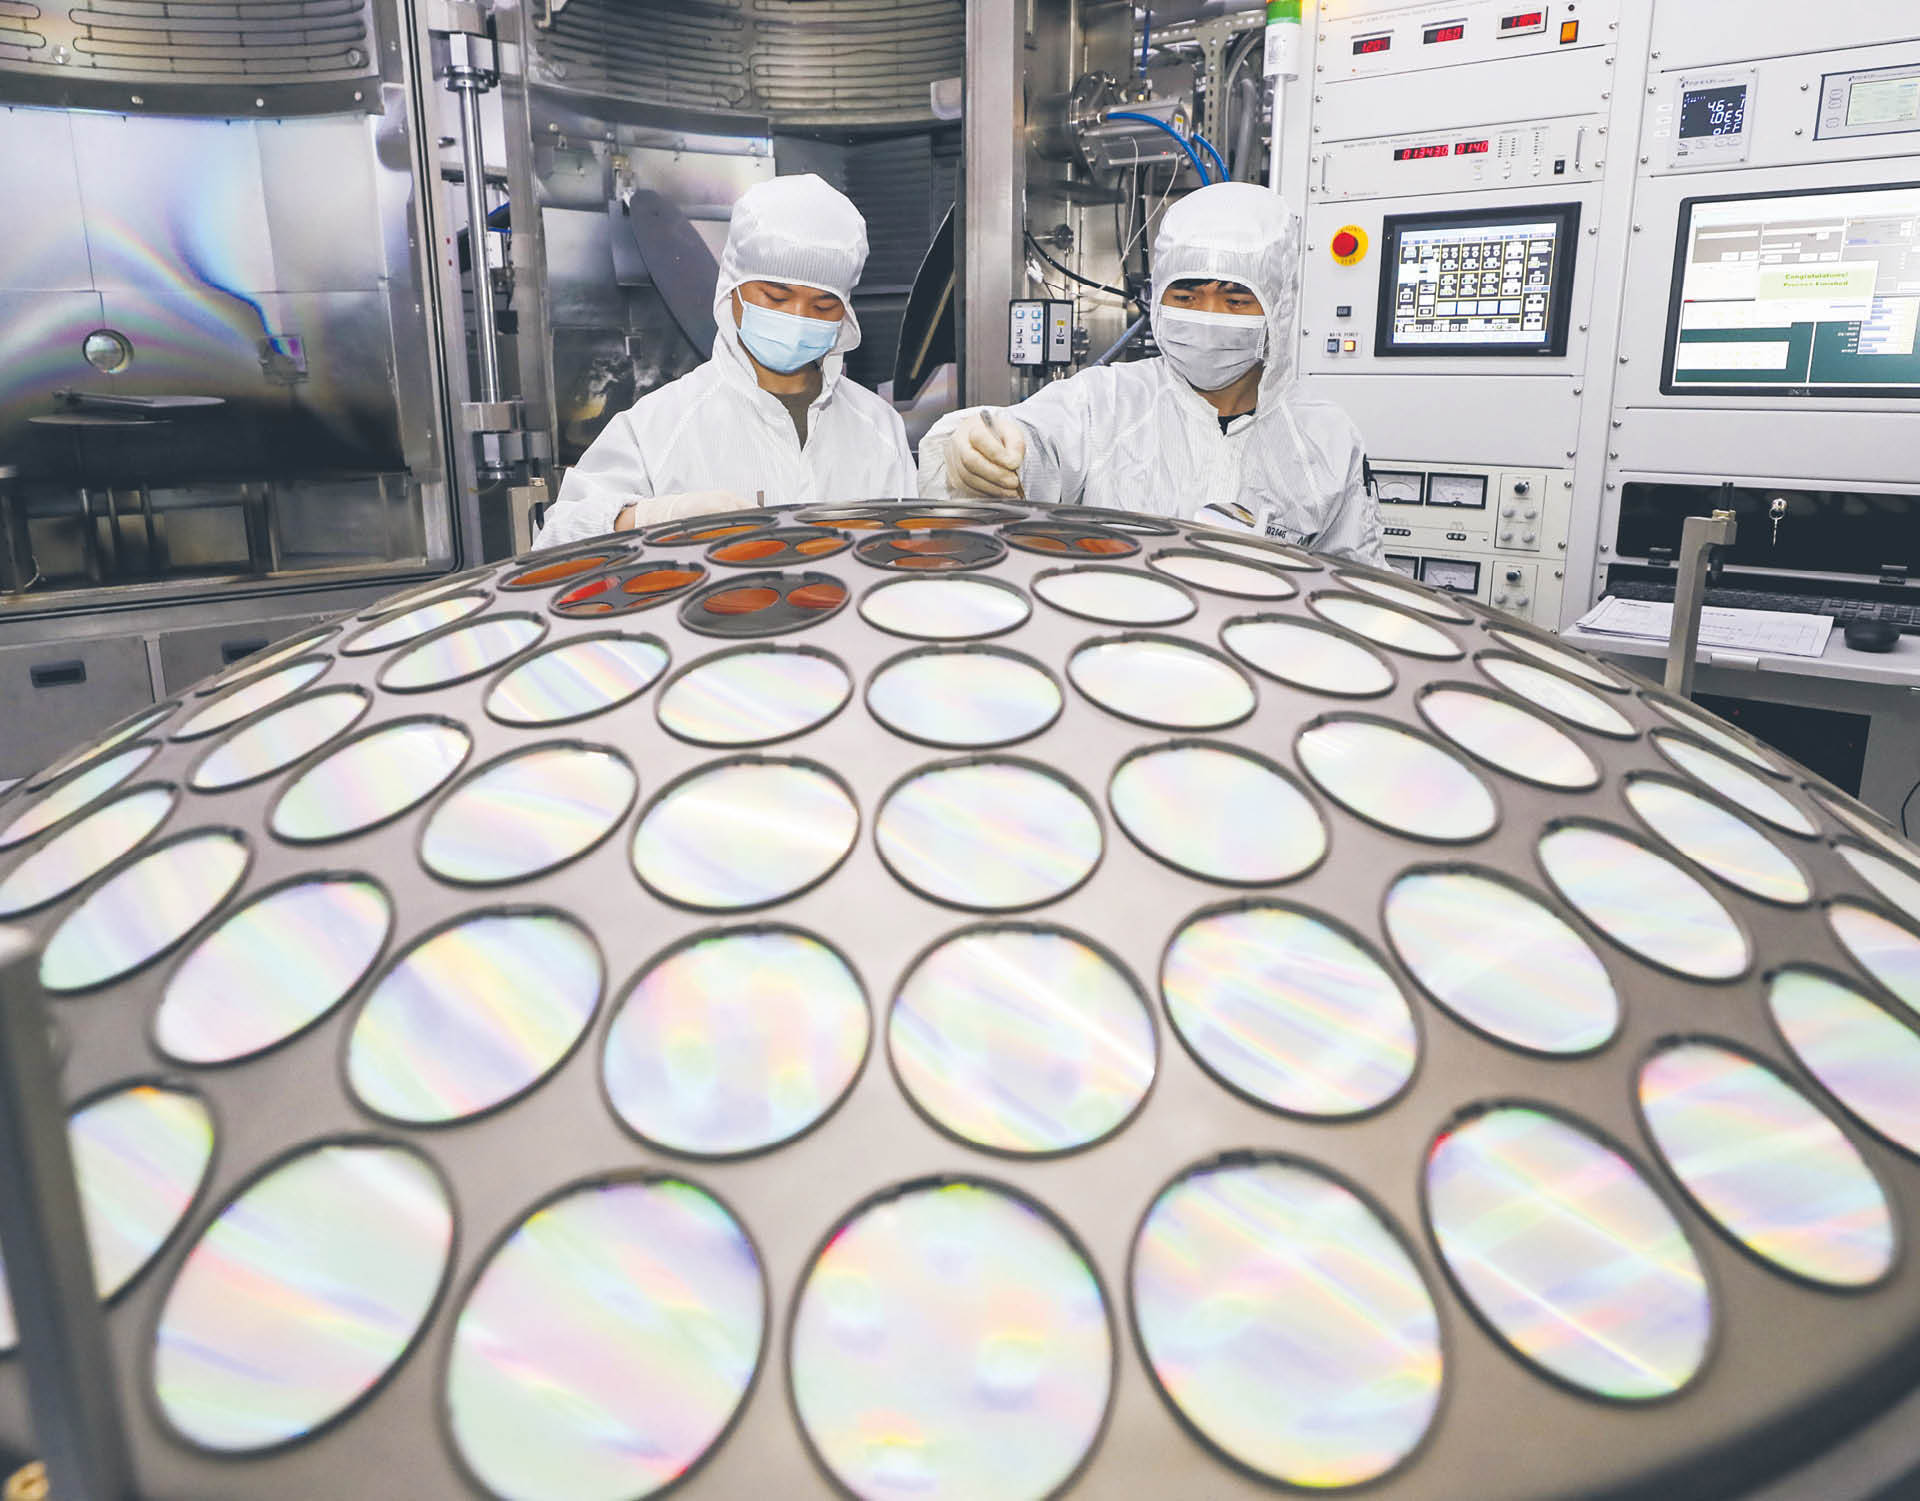 Production of silicon wafers used to make chips at the Jiangsu Azure Corp. factory, Huai'an, China, 25 March 2022